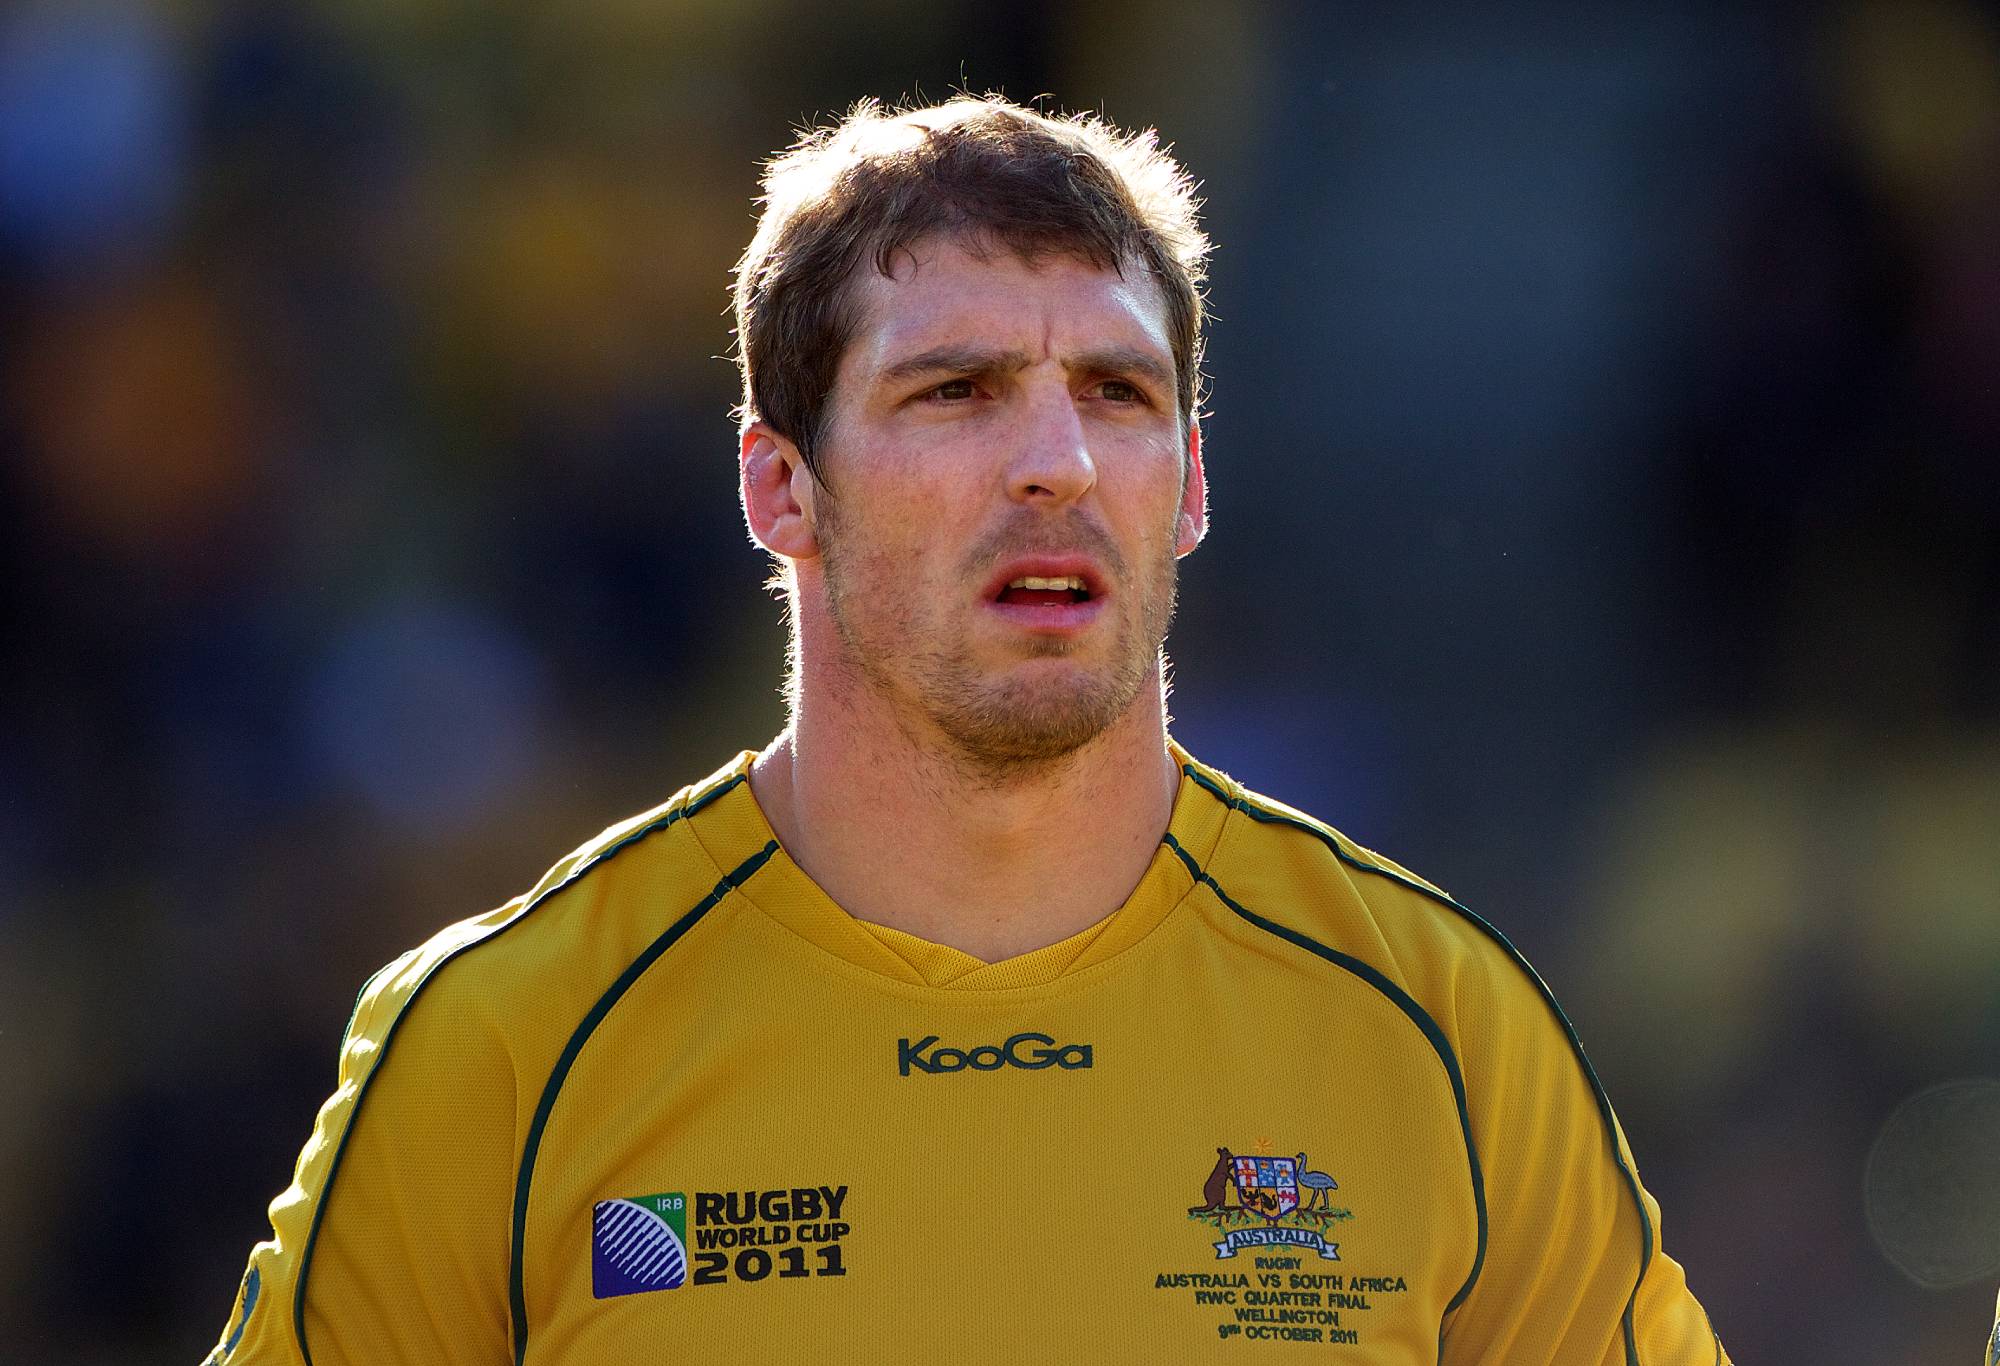 Dan Vickerman, Australia, during the teams national anthems before the South Africa V Australia Quarter Final match at the IRB Rugby World Cup tournament. Wellington Regional Stadium, Wellington, New Zealand, 9th October 2011. Photo Tim Clayton (Photo by Tim Clayton/Corbis via Getty Images)